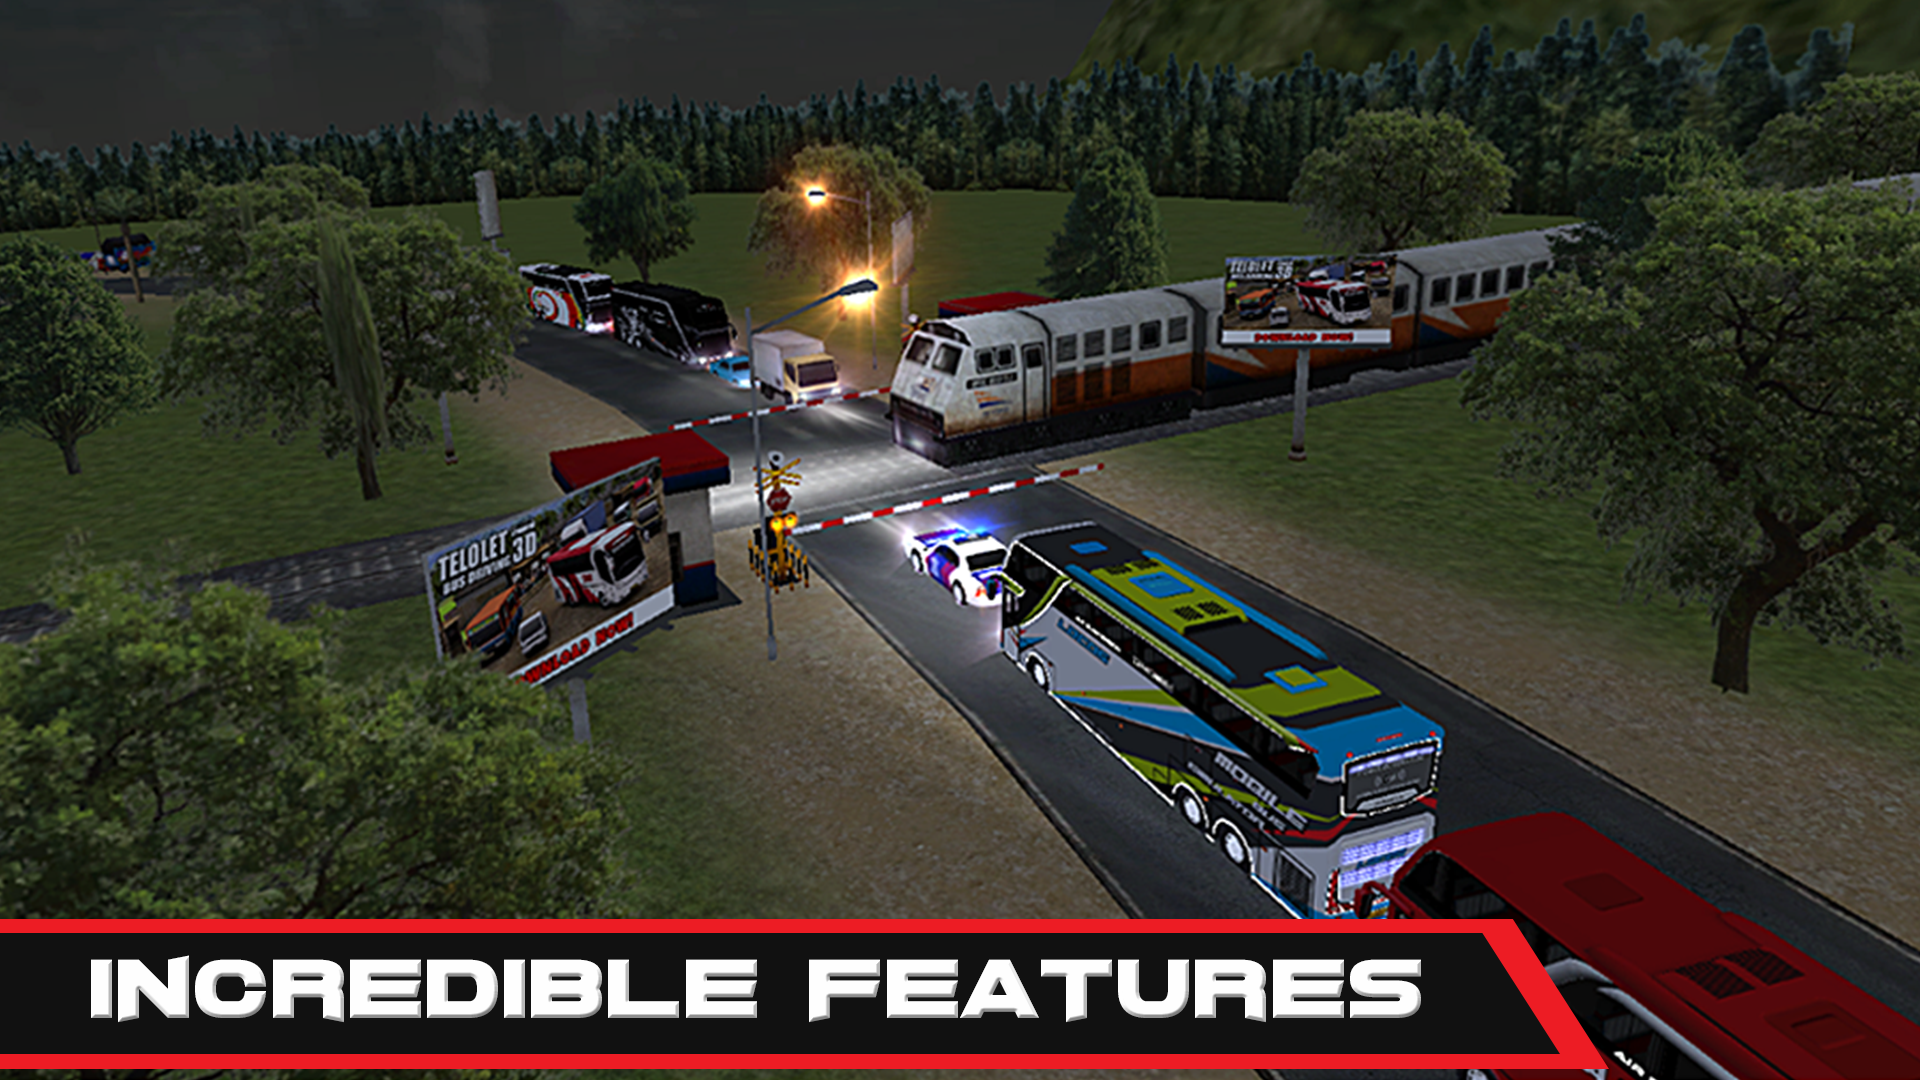 Mobile Bus Simulator for Android - APK Download - 